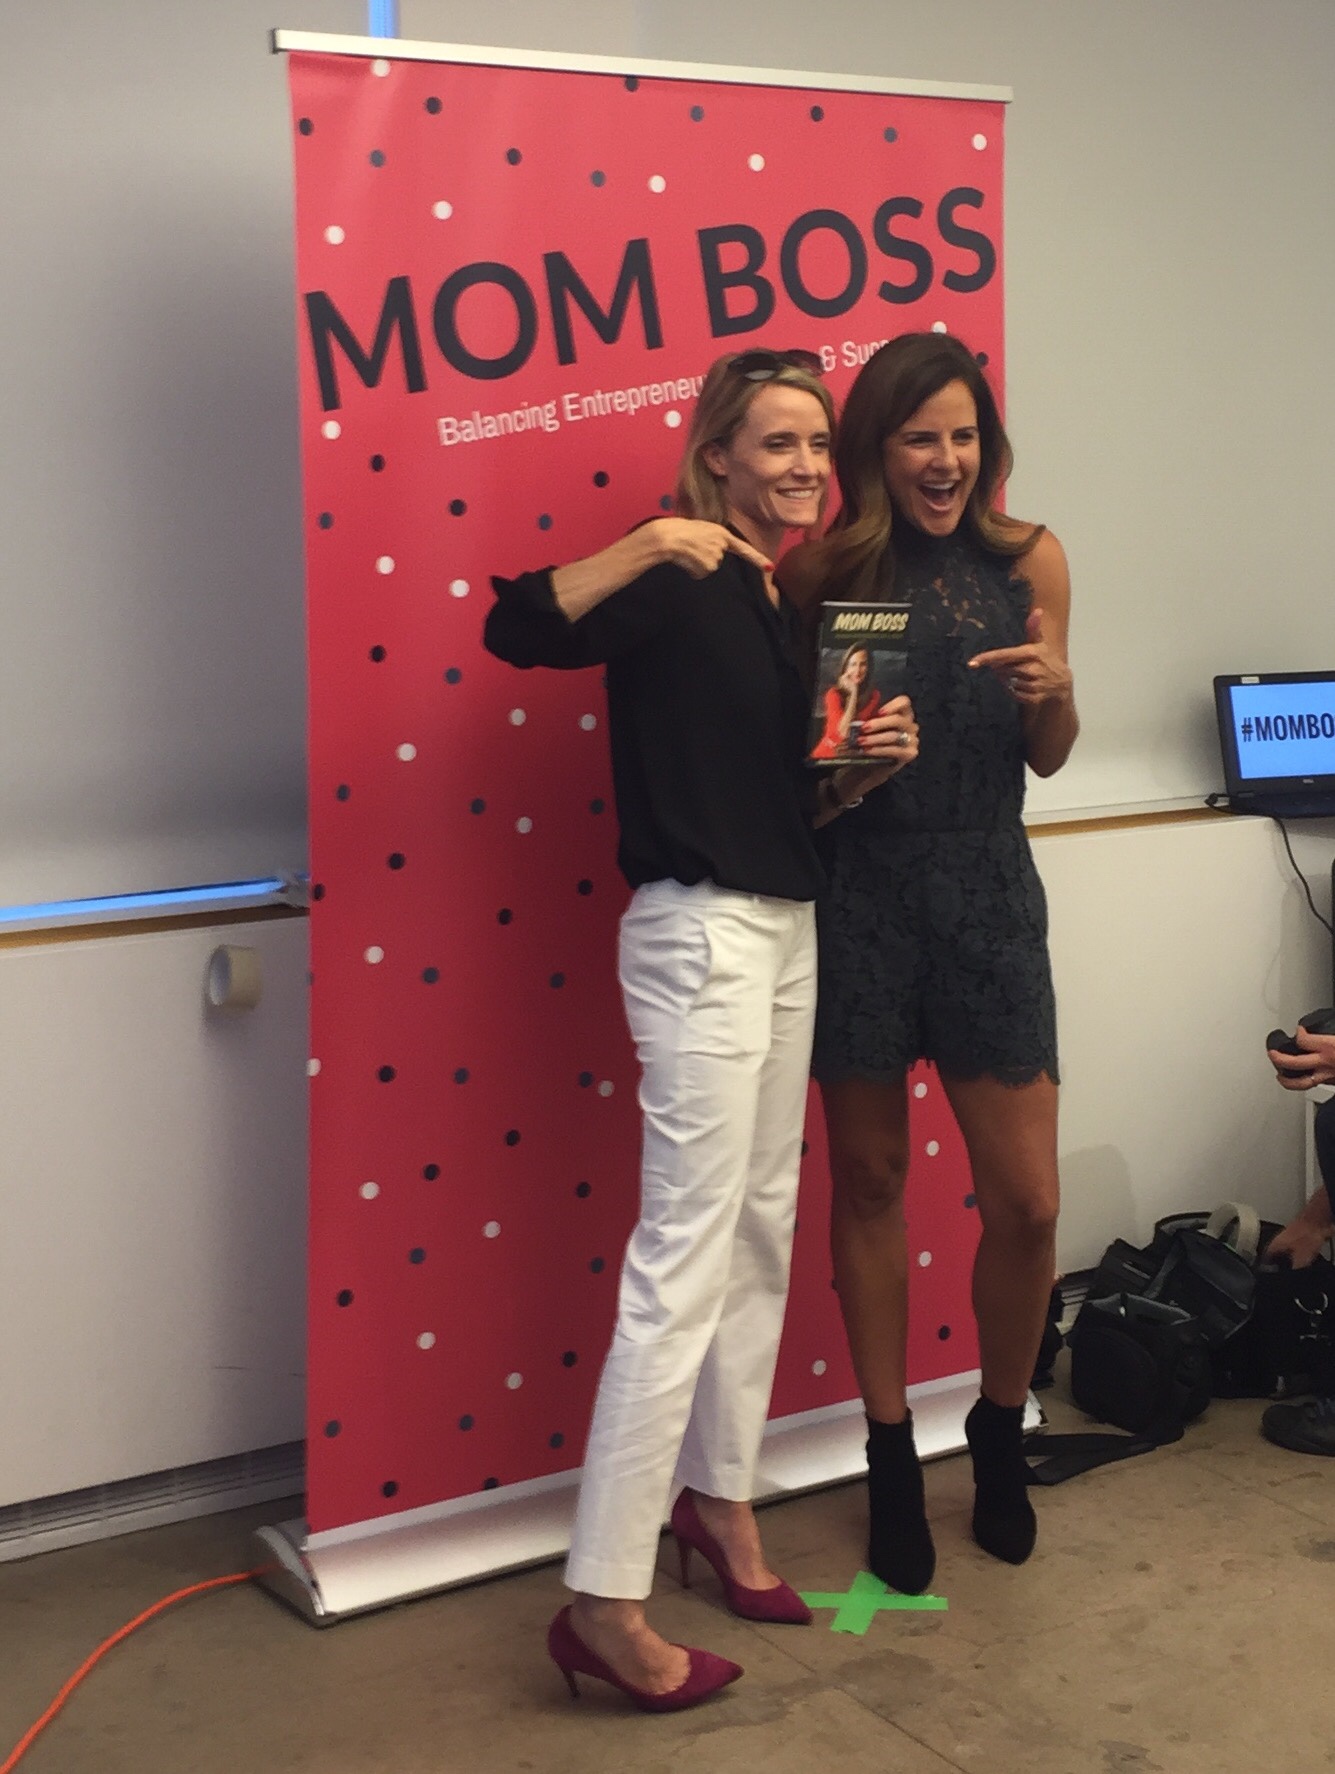  Carley Roney and Mom Boss author Nicole Feliciano pose at the book launch party. 